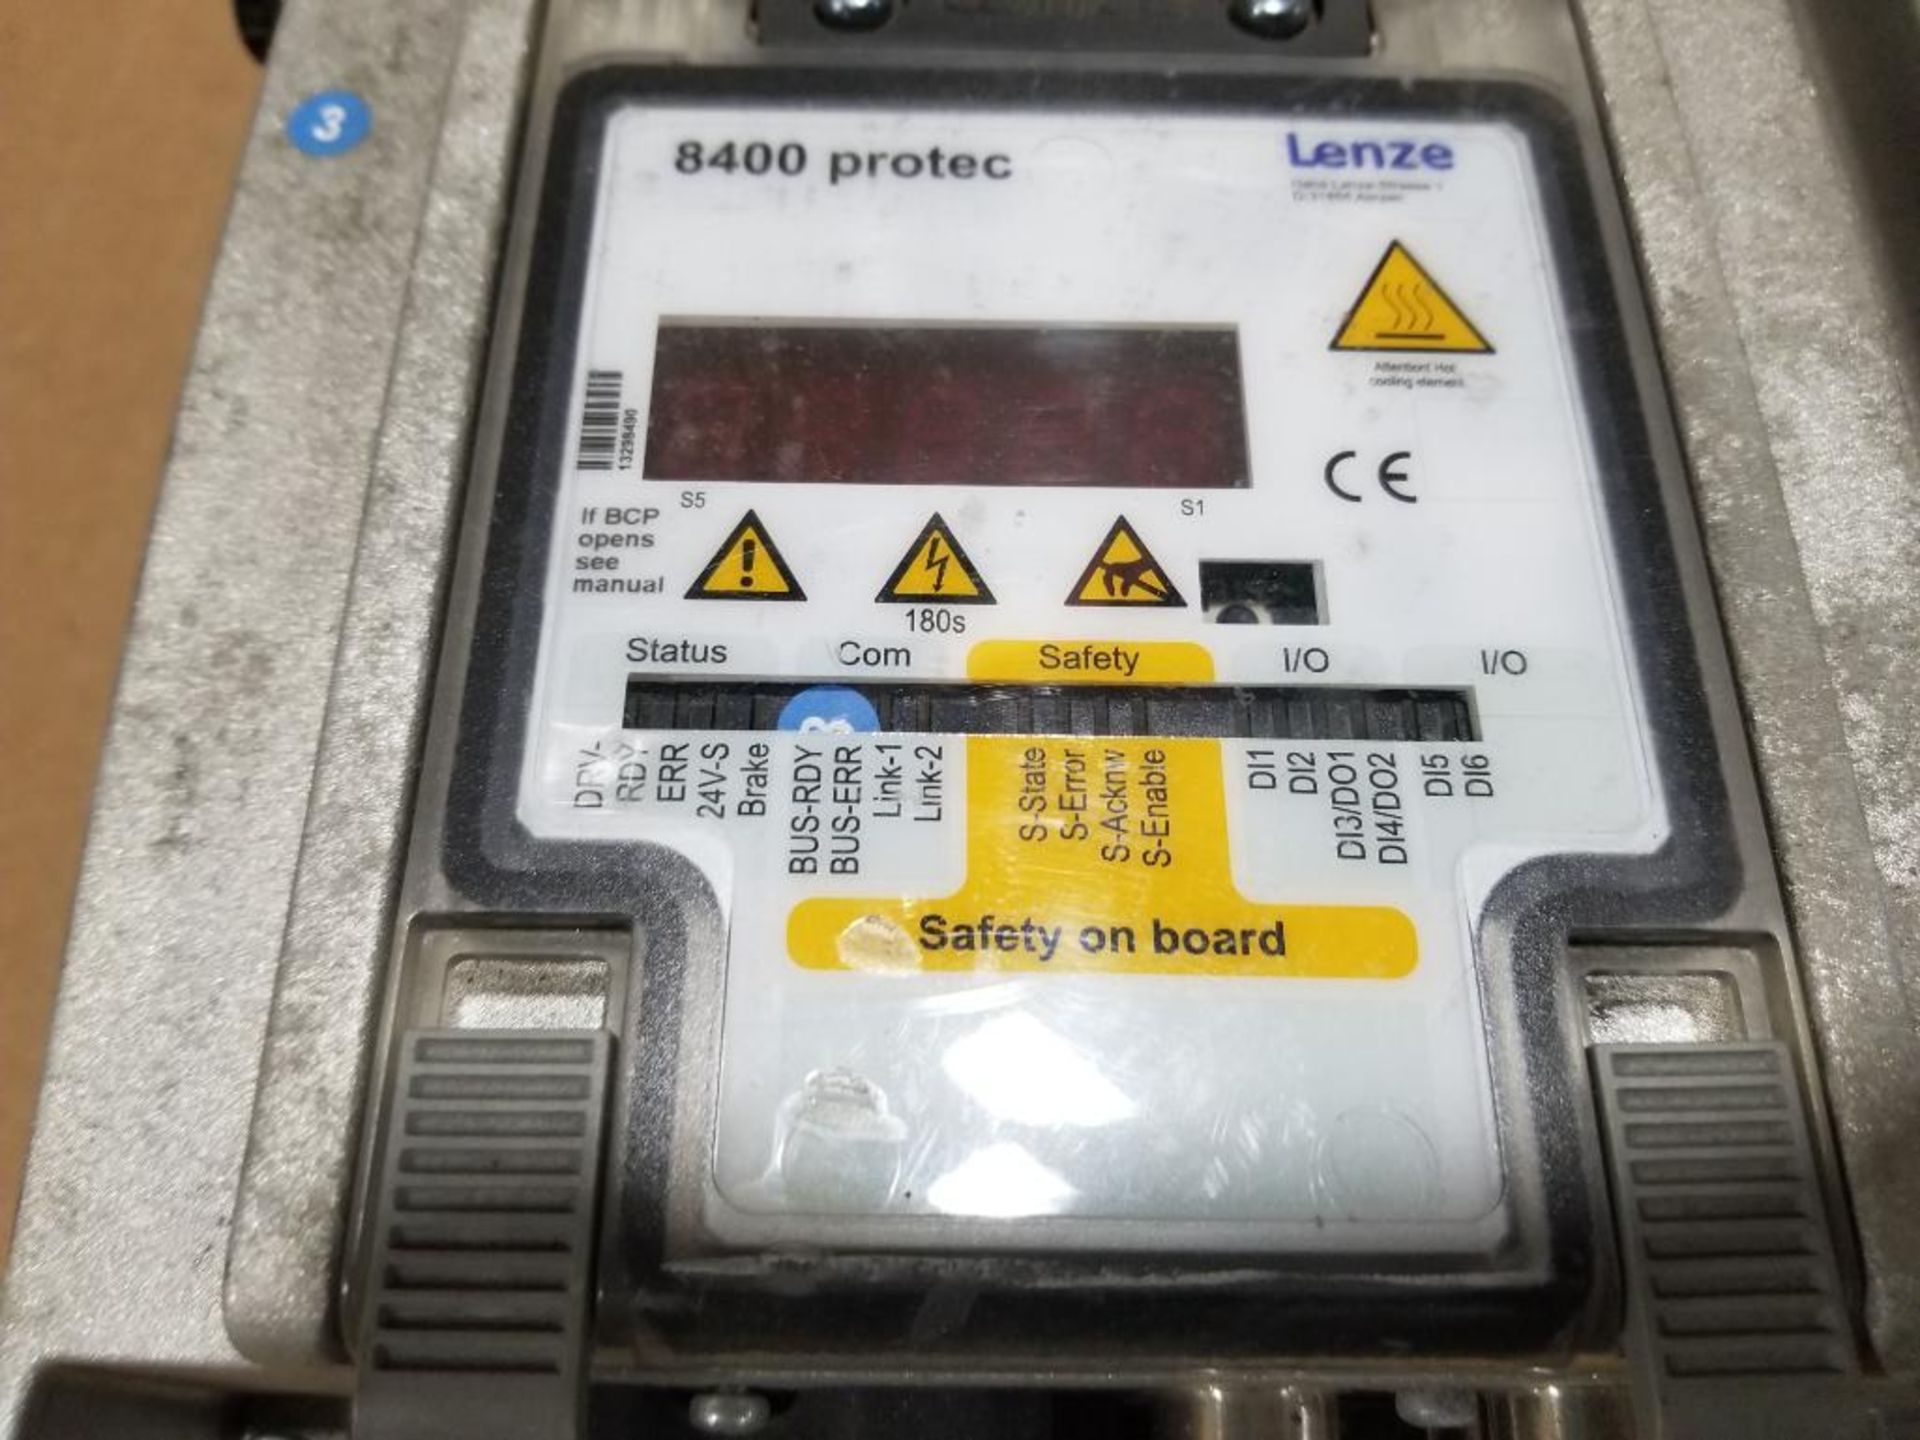 Lenze safety drive. 8400 protec. - Image 3 of 6